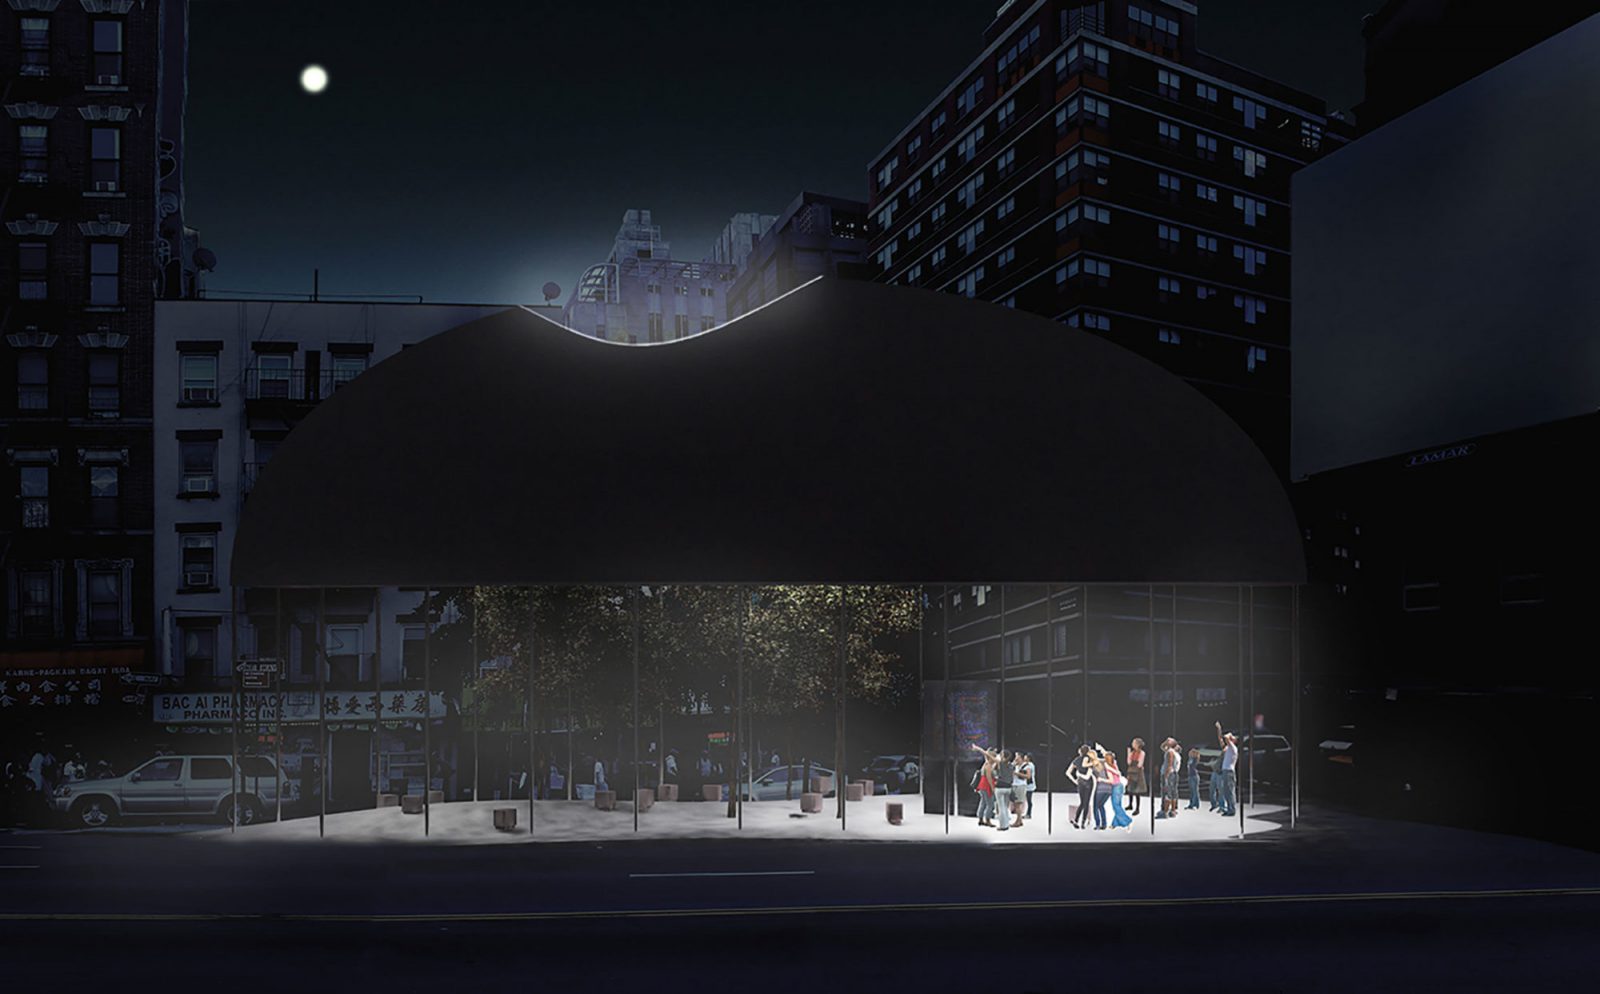 Archisearch LOT office for architecture designed a light concrete dome pavilion in New York inspired by the 21st Century vision of the traditional Chinatown Gateway